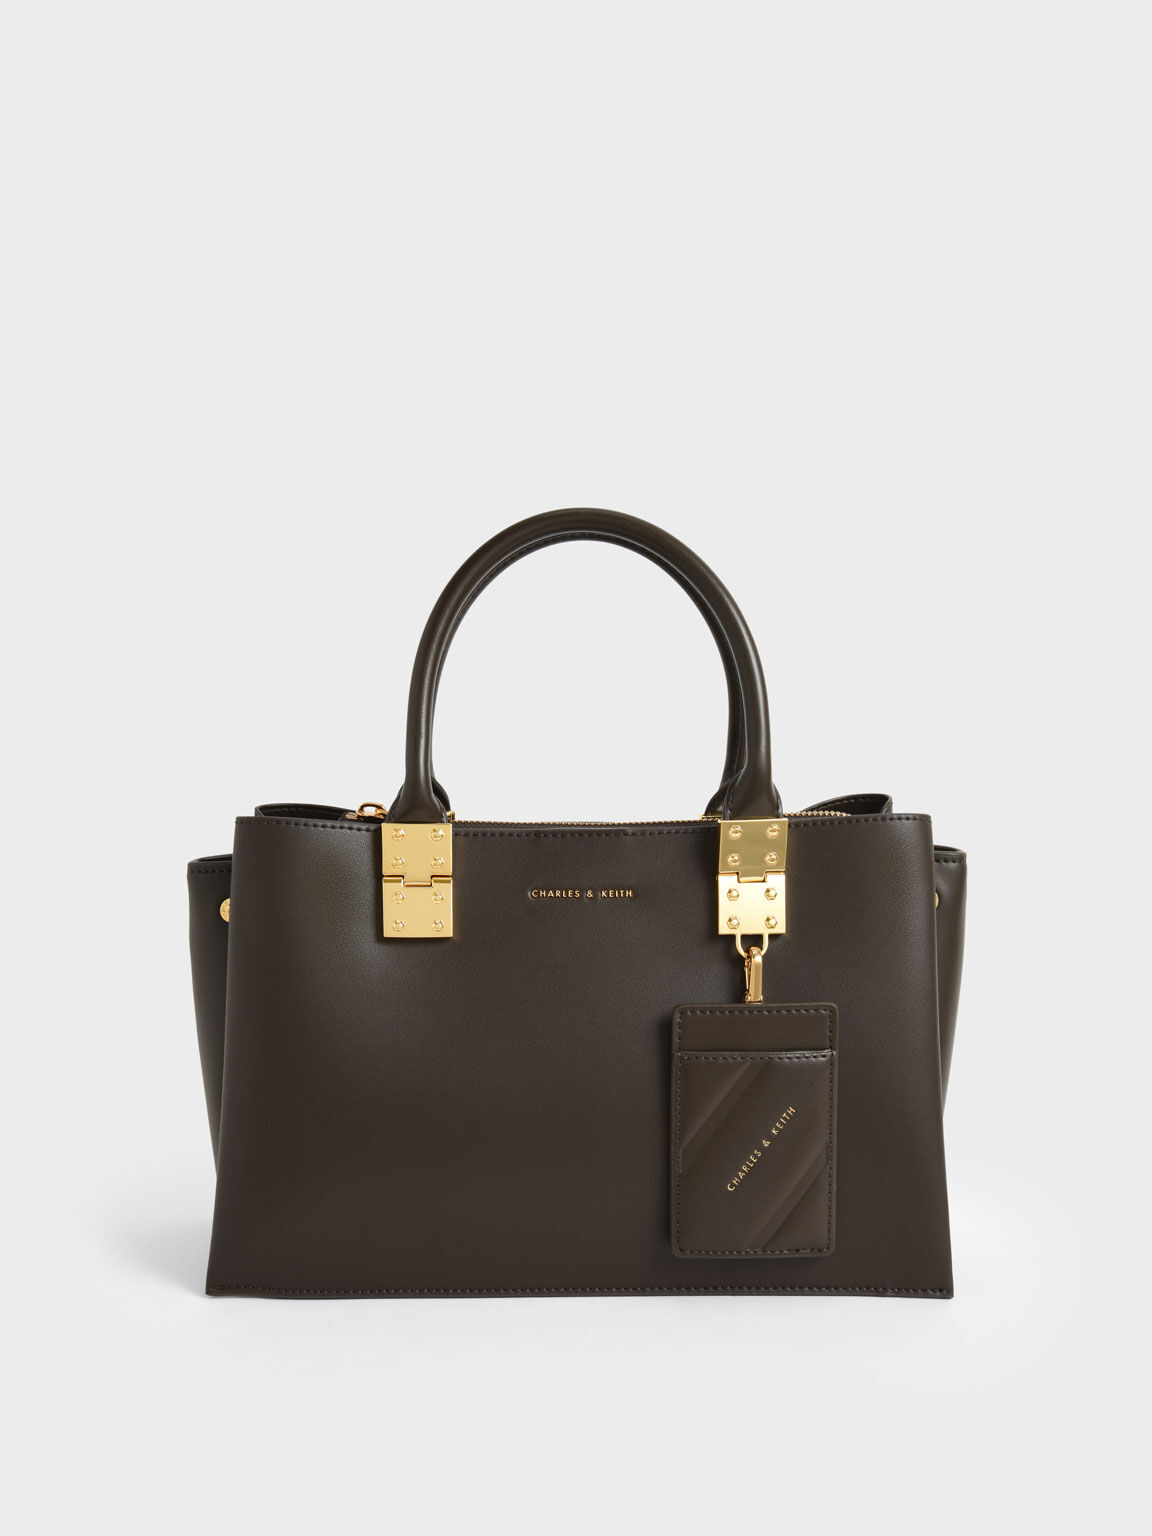 Women's New Arrival Bags | Latest Styles - CHARLES & KEITH US